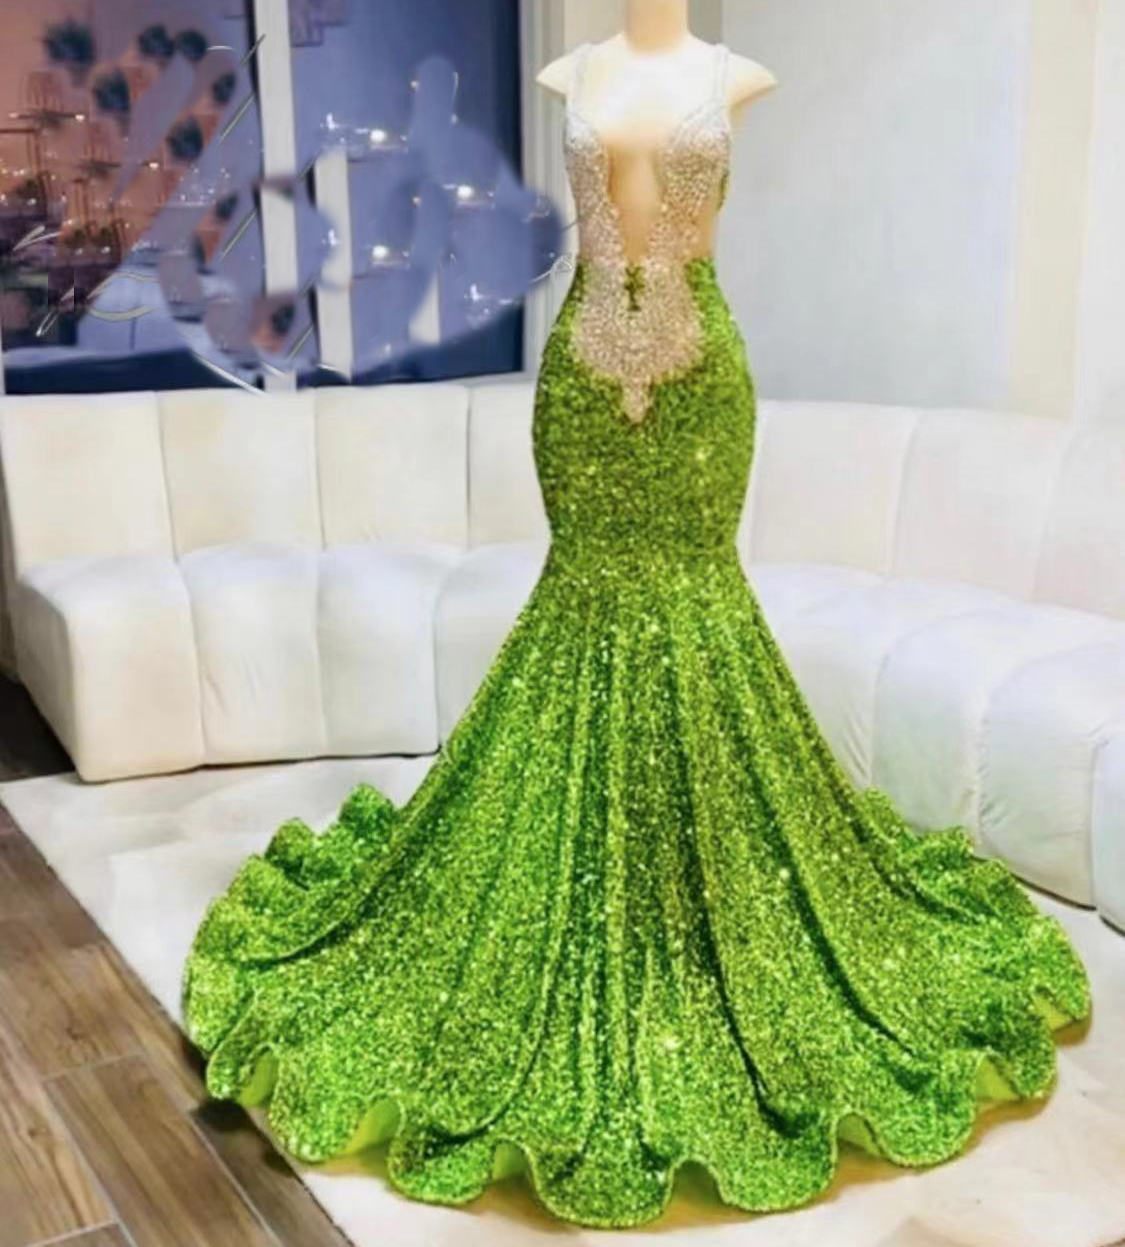 Glitter Olive Green Prom Dresses Luxury Beaded Crystals Fashion Evening Dresses Spaghetti Strap Mermaid Sparkly Formal Occasion Dresses Abiye